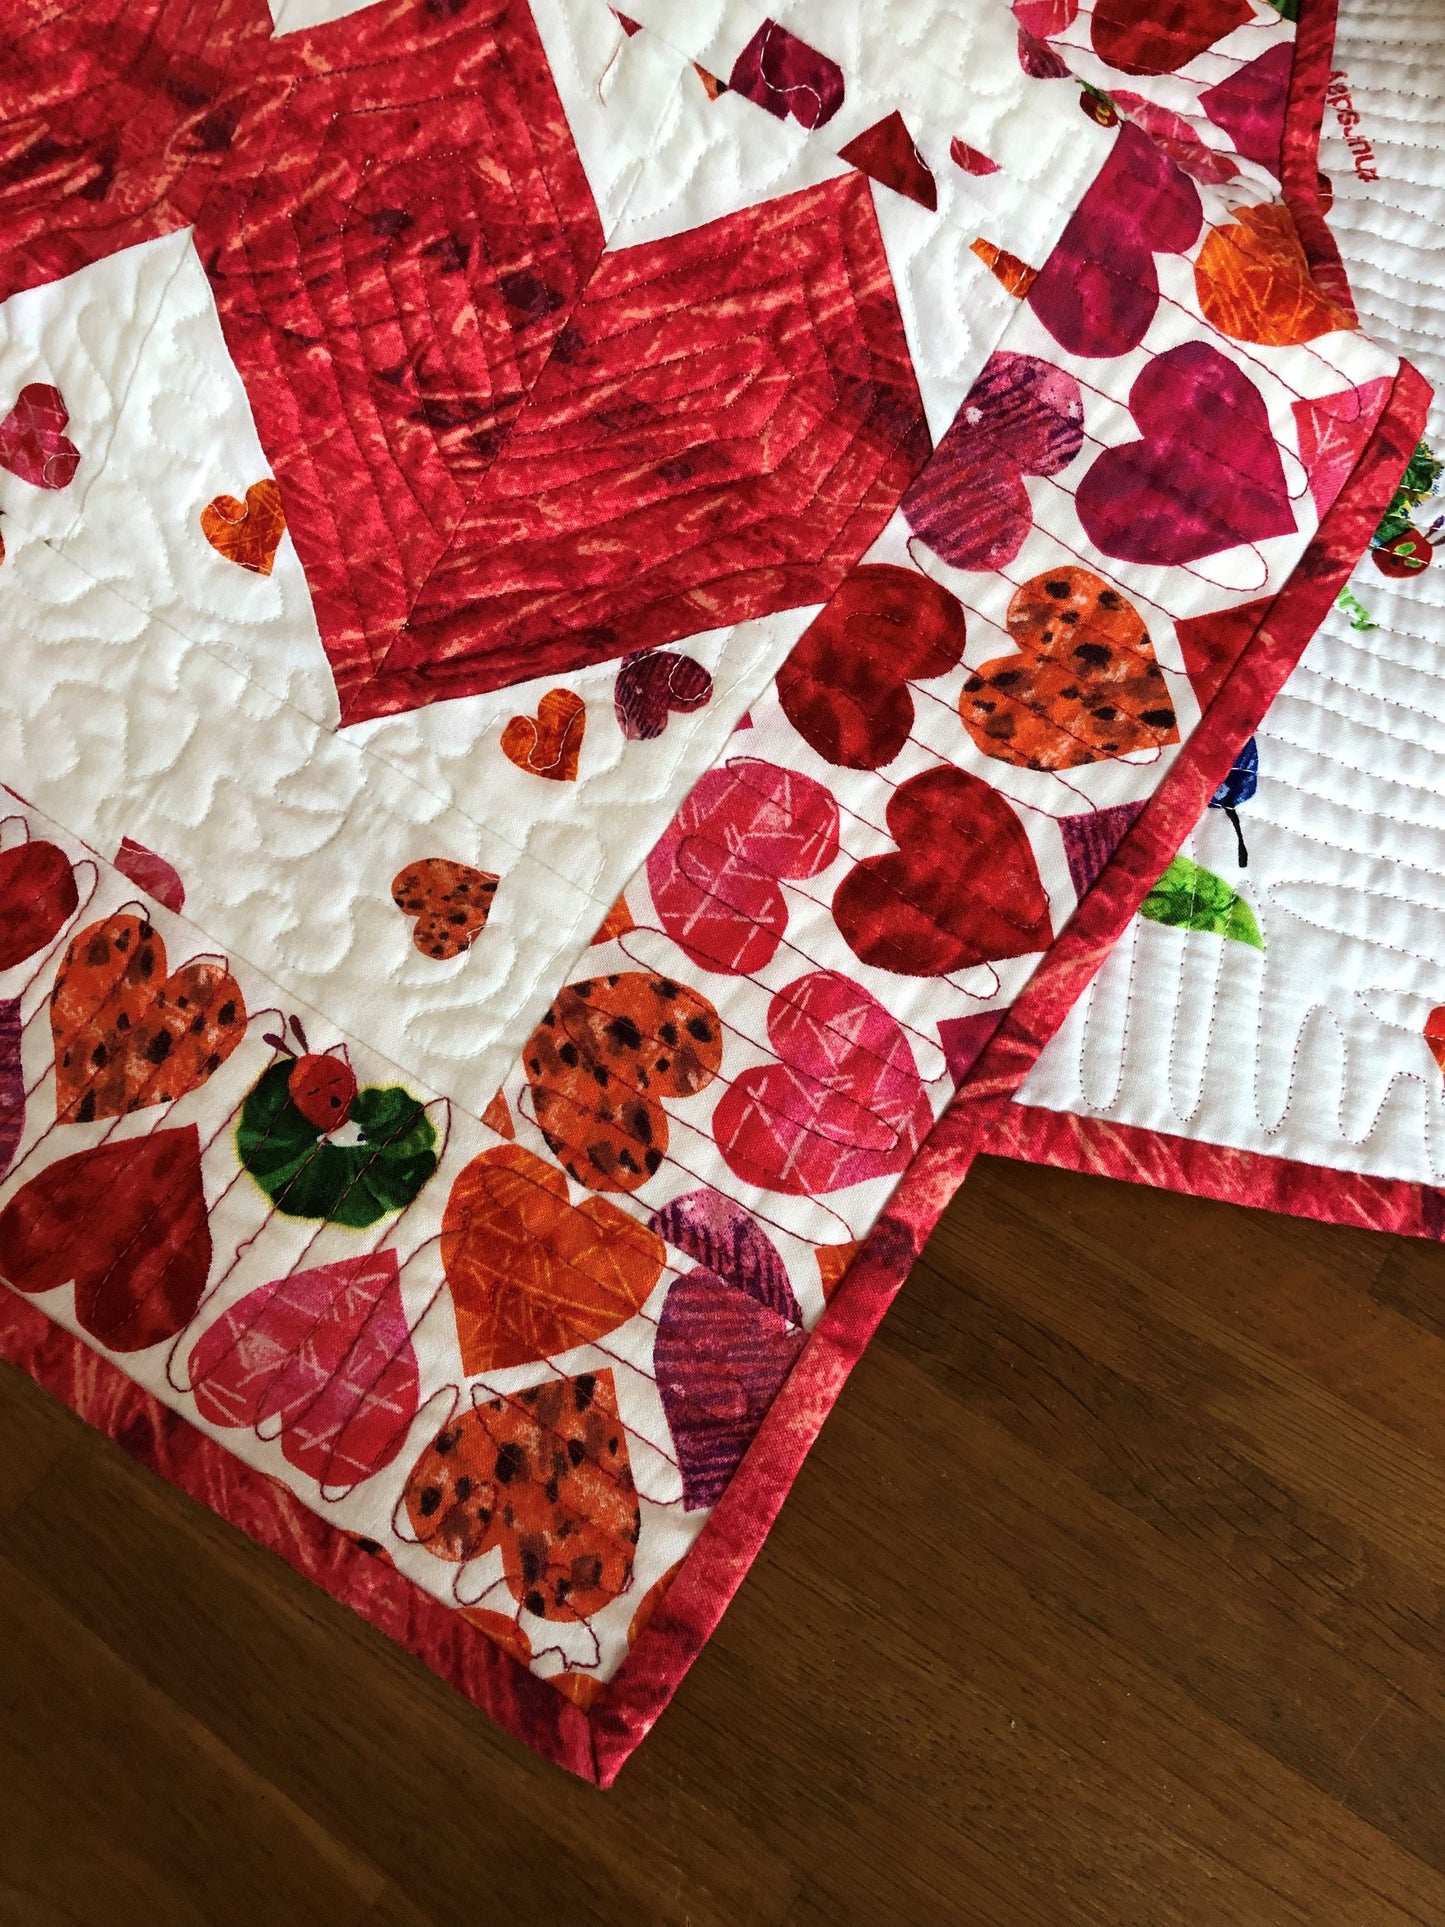 'I Love You' - The Very Hungry Caterpillar Play Quilt